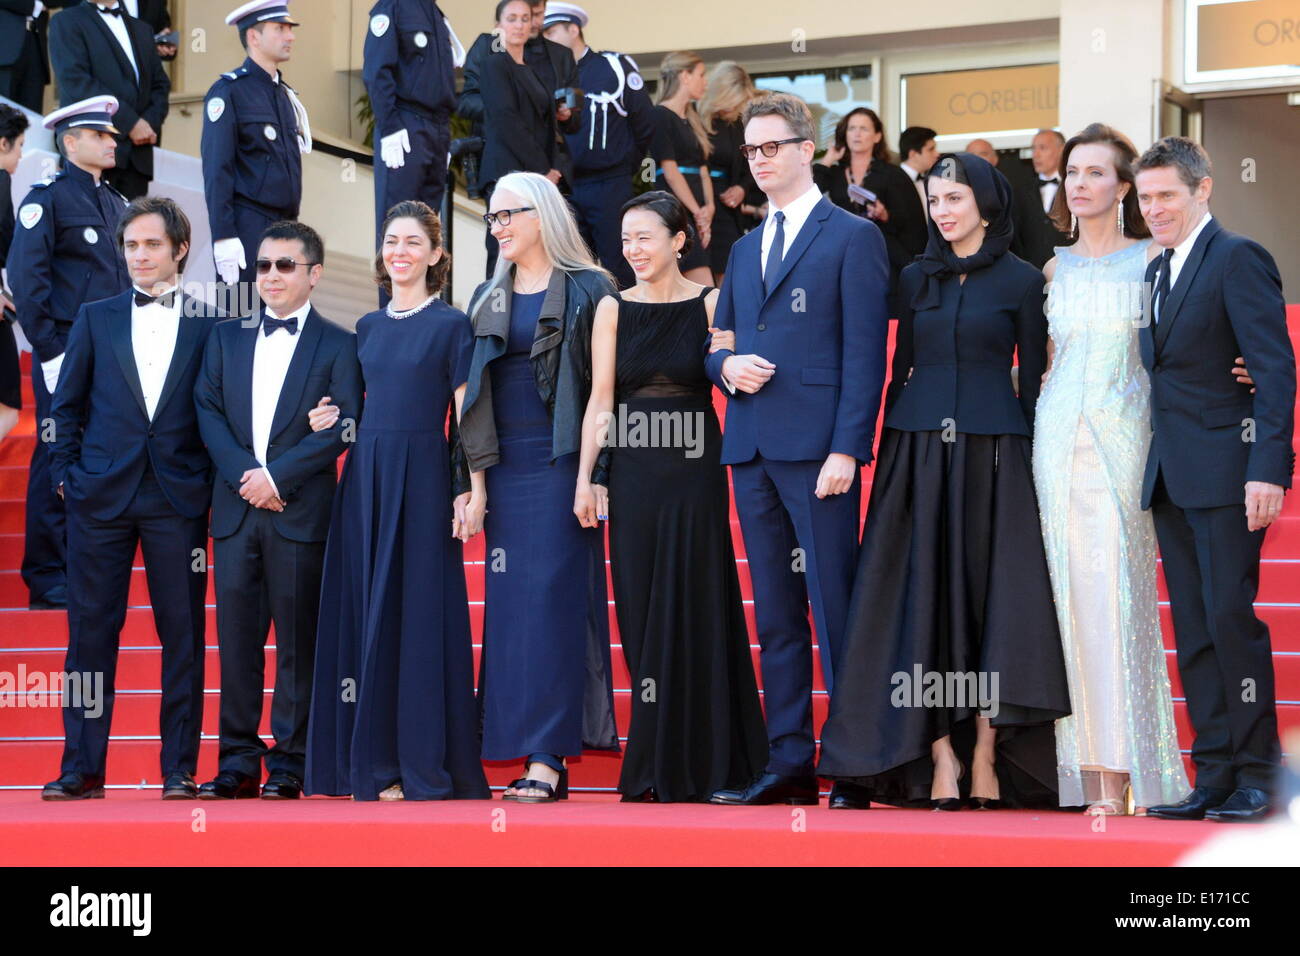 Cannes, France. 24th May, 2014. CANNES, FRANCE - MAY 24: Chinese director Jia Zhangke, US director Sofia Coppola, President of the Feature films Jury Jane Campion, South Korean actress Jeon Do-yeon, Danish director Nicolas Winding Refn, Iranian actress Leila Hatami, French actress Carole Bouquet and US actor Willem Dafoe attends the Closing Ceremony and 'A Fistful of Dollars' Screening during the 67th Annual Cannes Film Festival on May 24, 2014 in Cannes, France Credit:  Frederick Injimbert/ZUMAPRESS.com/Alamy Live News Stock Photo